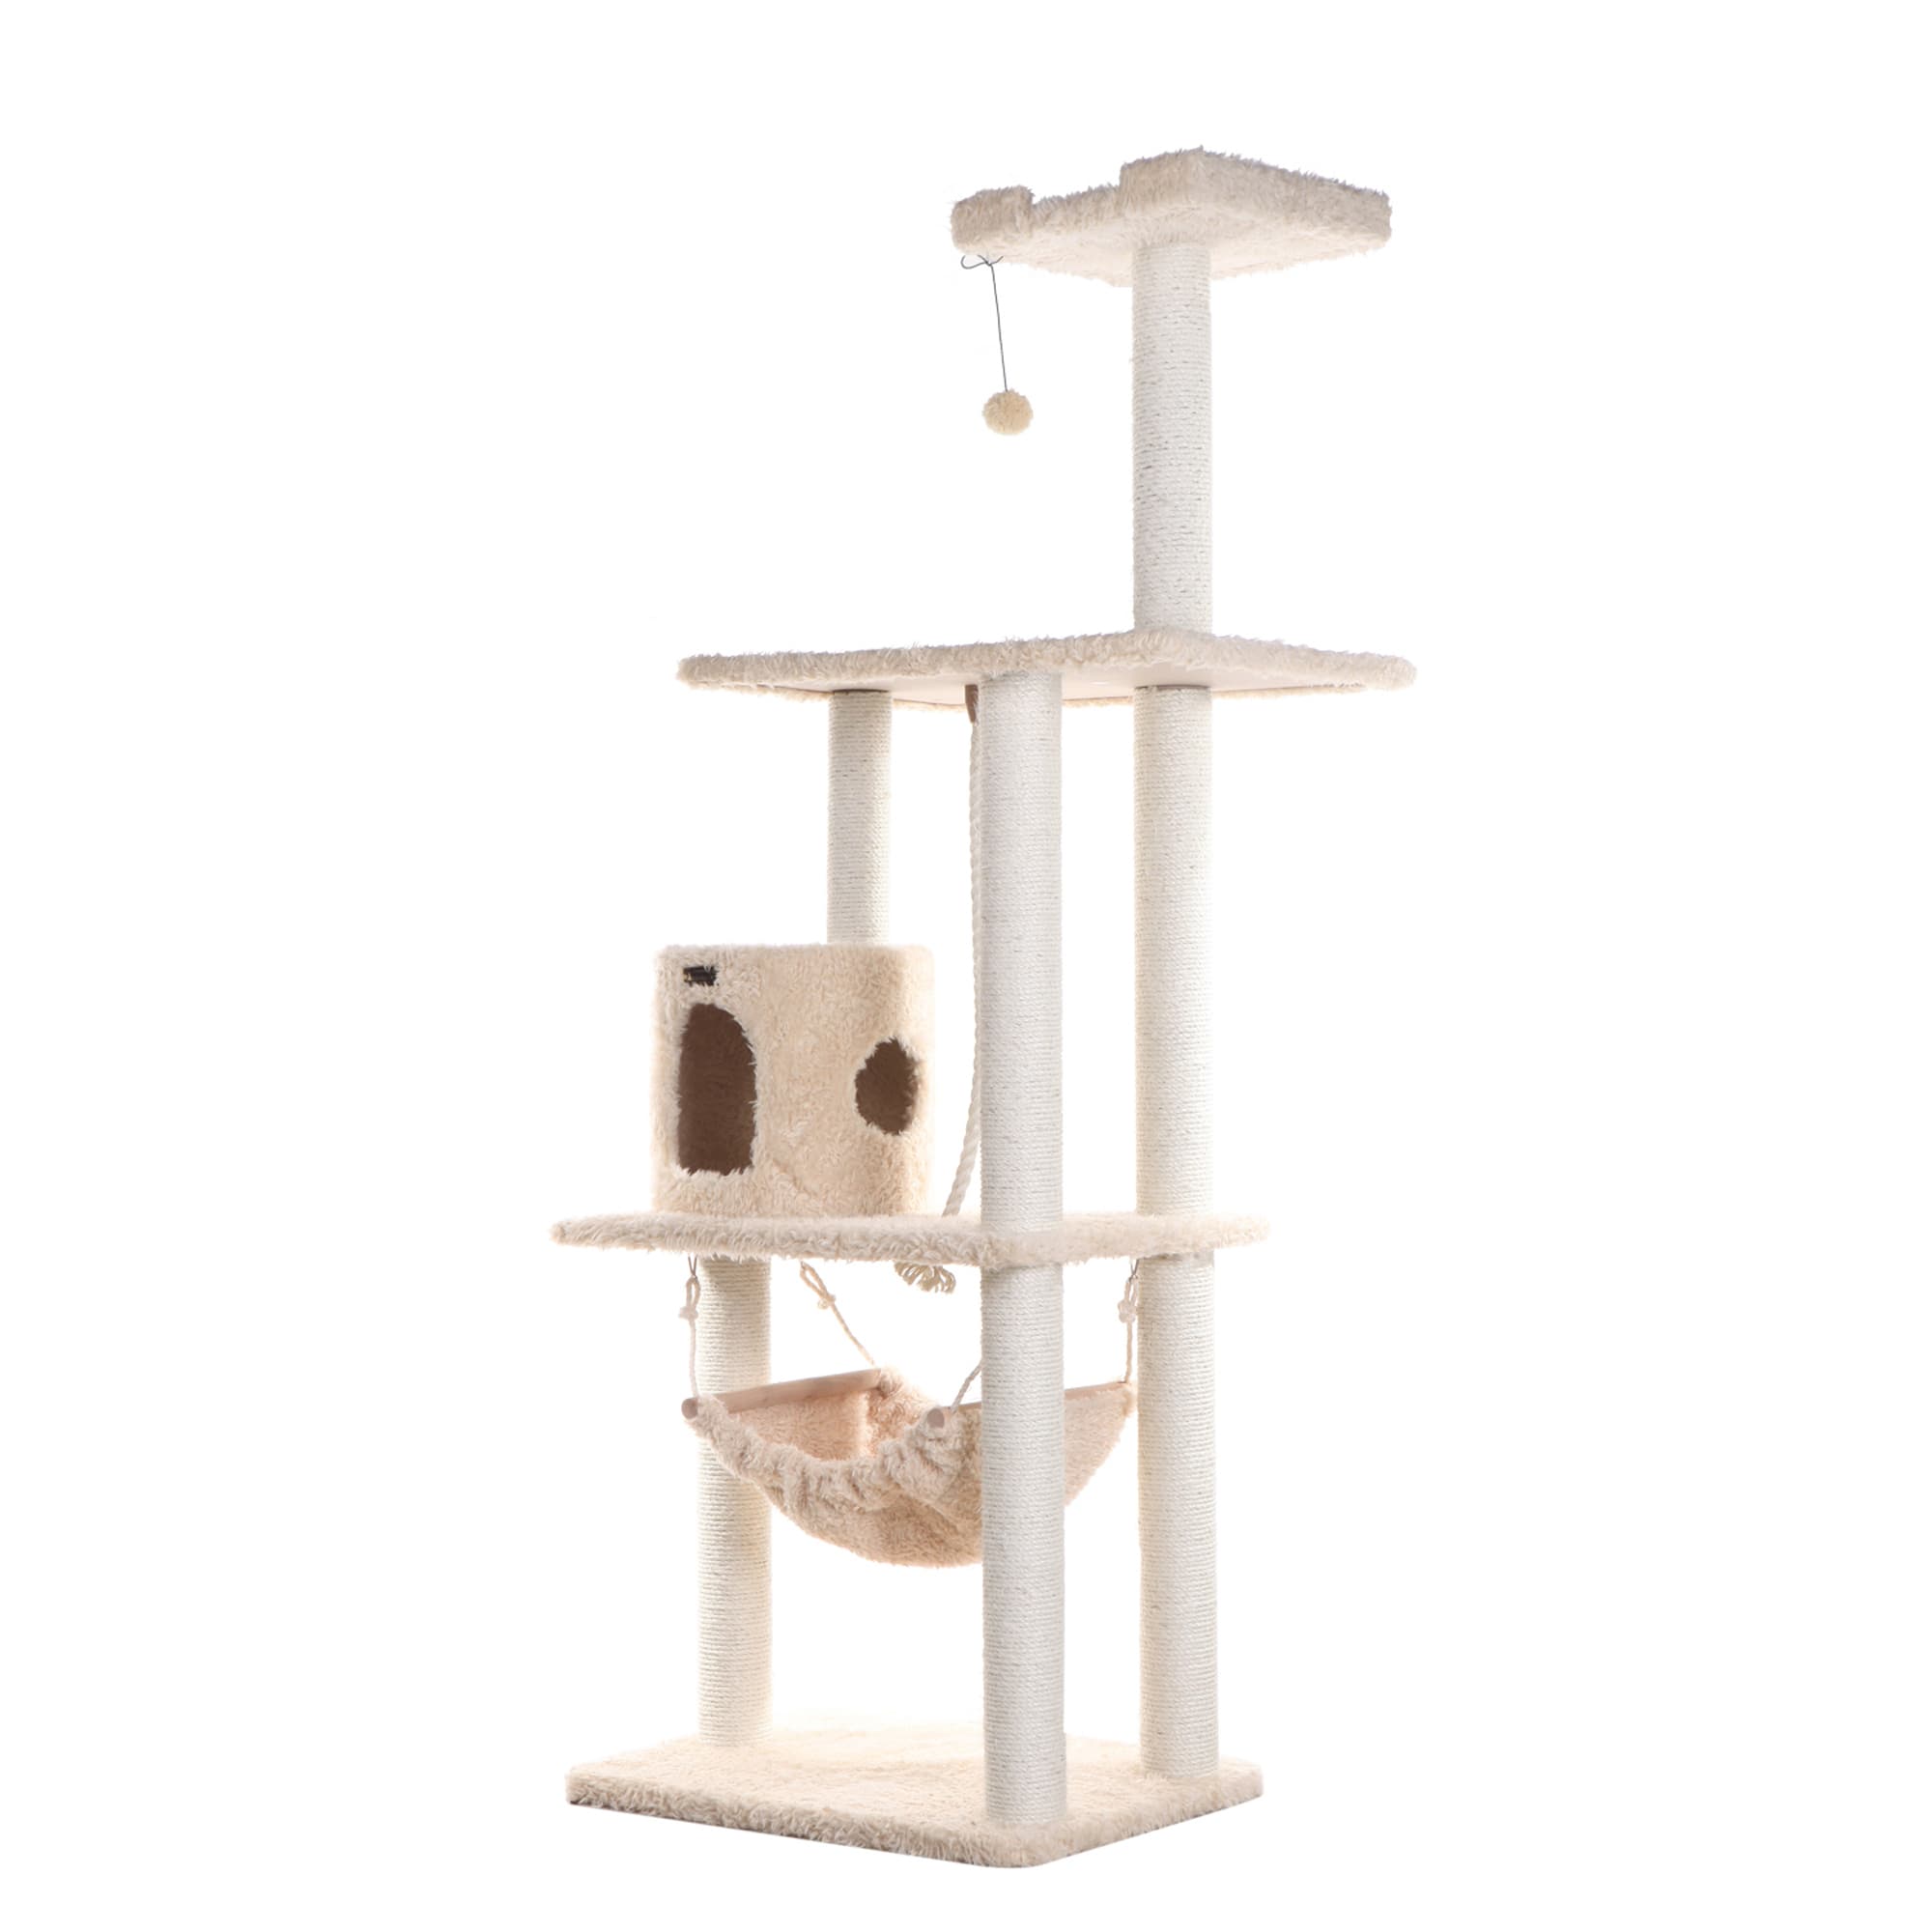 Photos - Other for Cats Armarkat Classic Model A7005 Real Wood Cat Tree, 70" H, 34 IN, Cr 